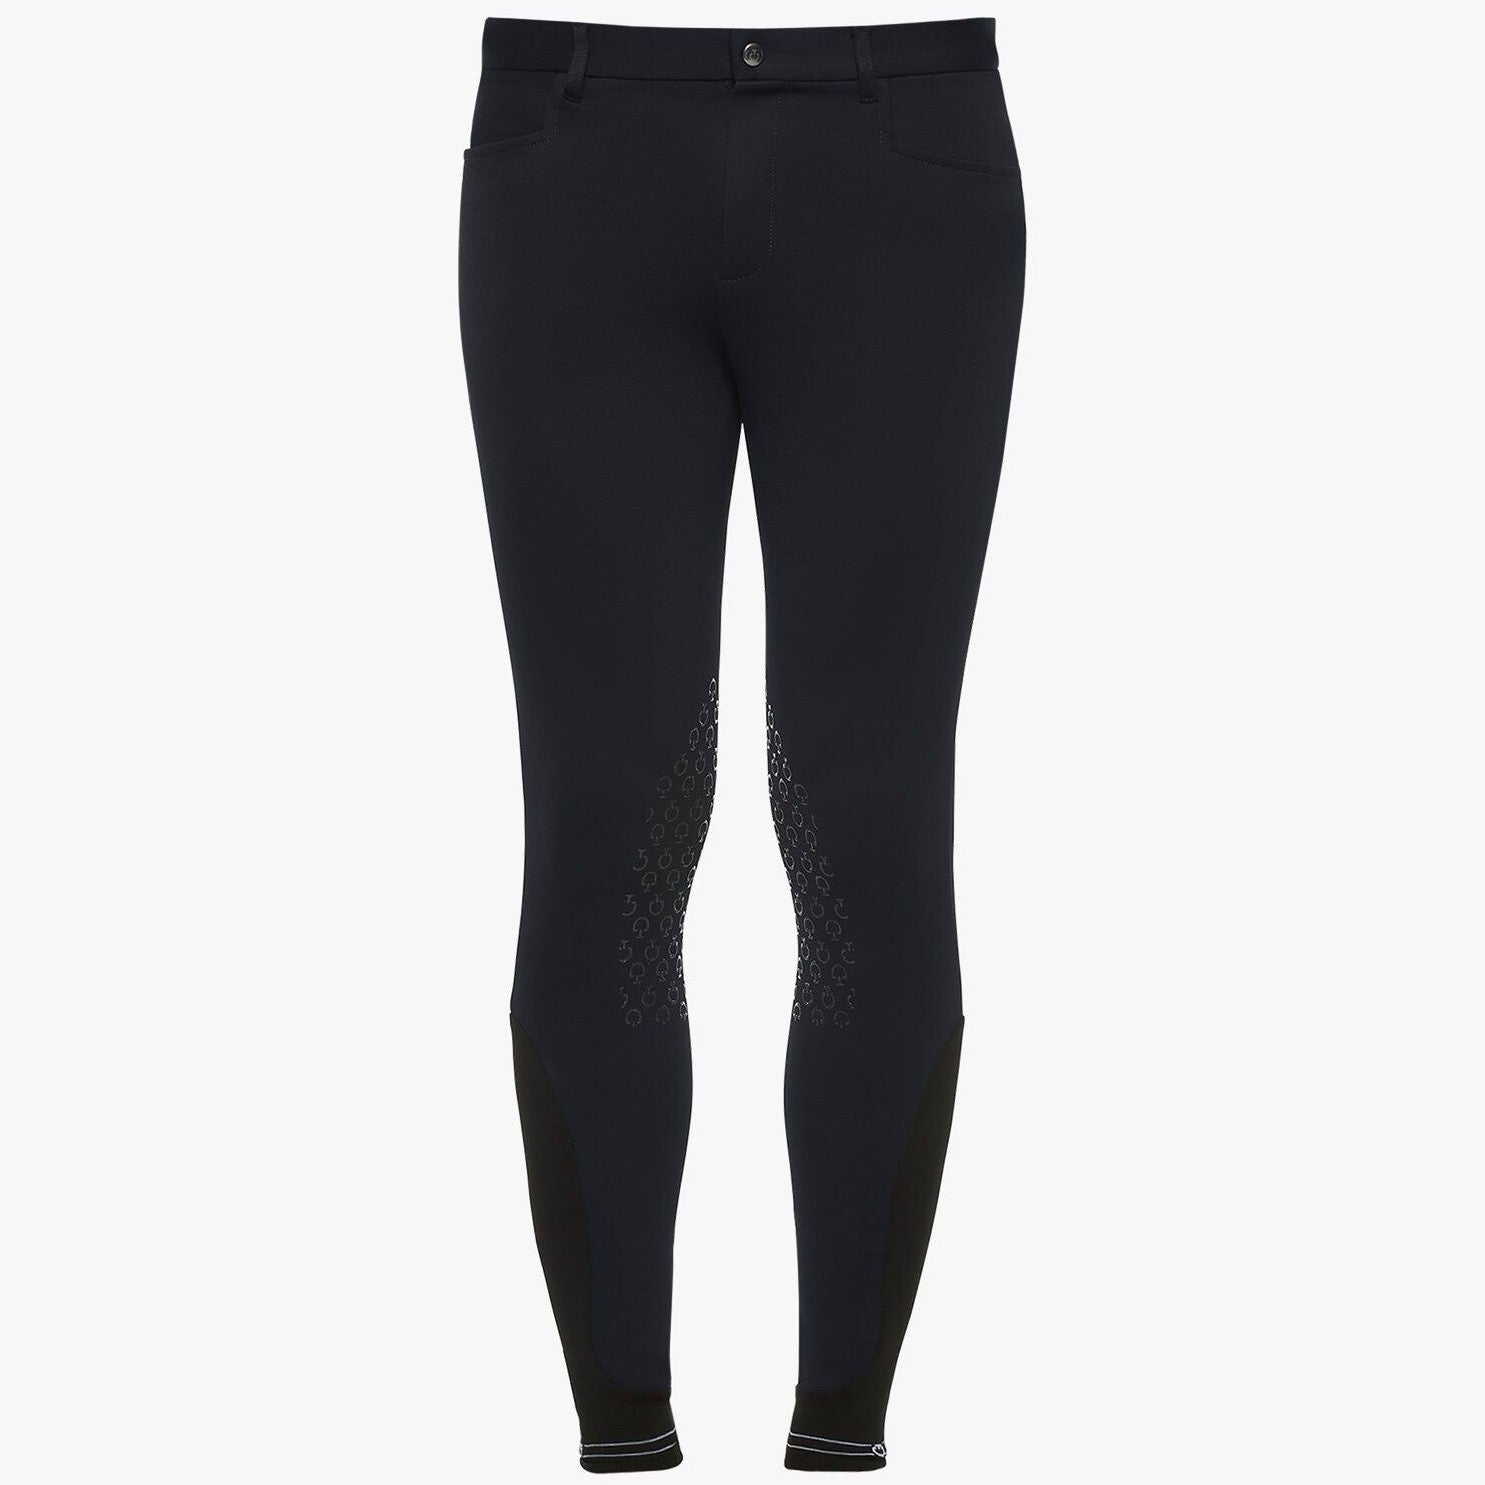 Men's breeches with knee patches